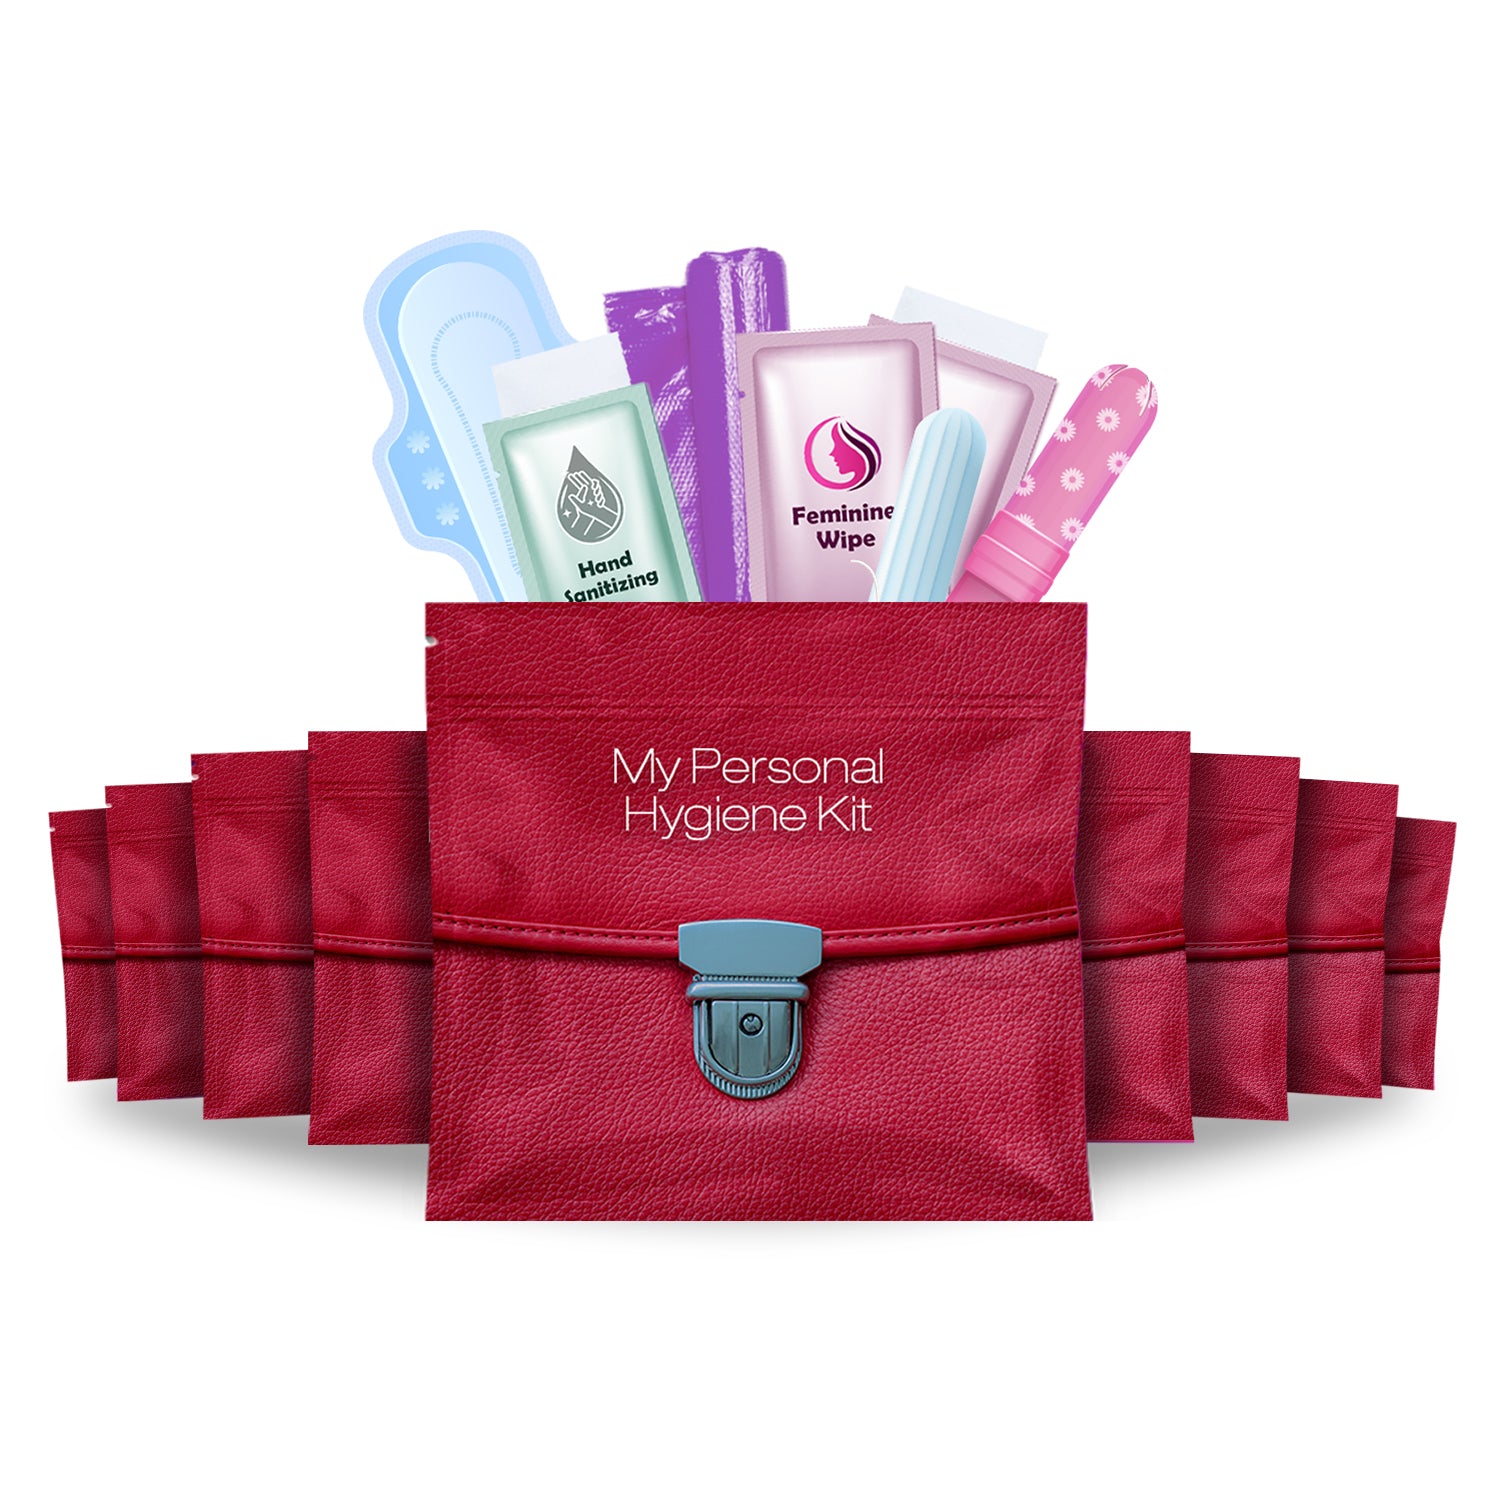 A Mini Emergency Kit for your Purse - B Loved Boston